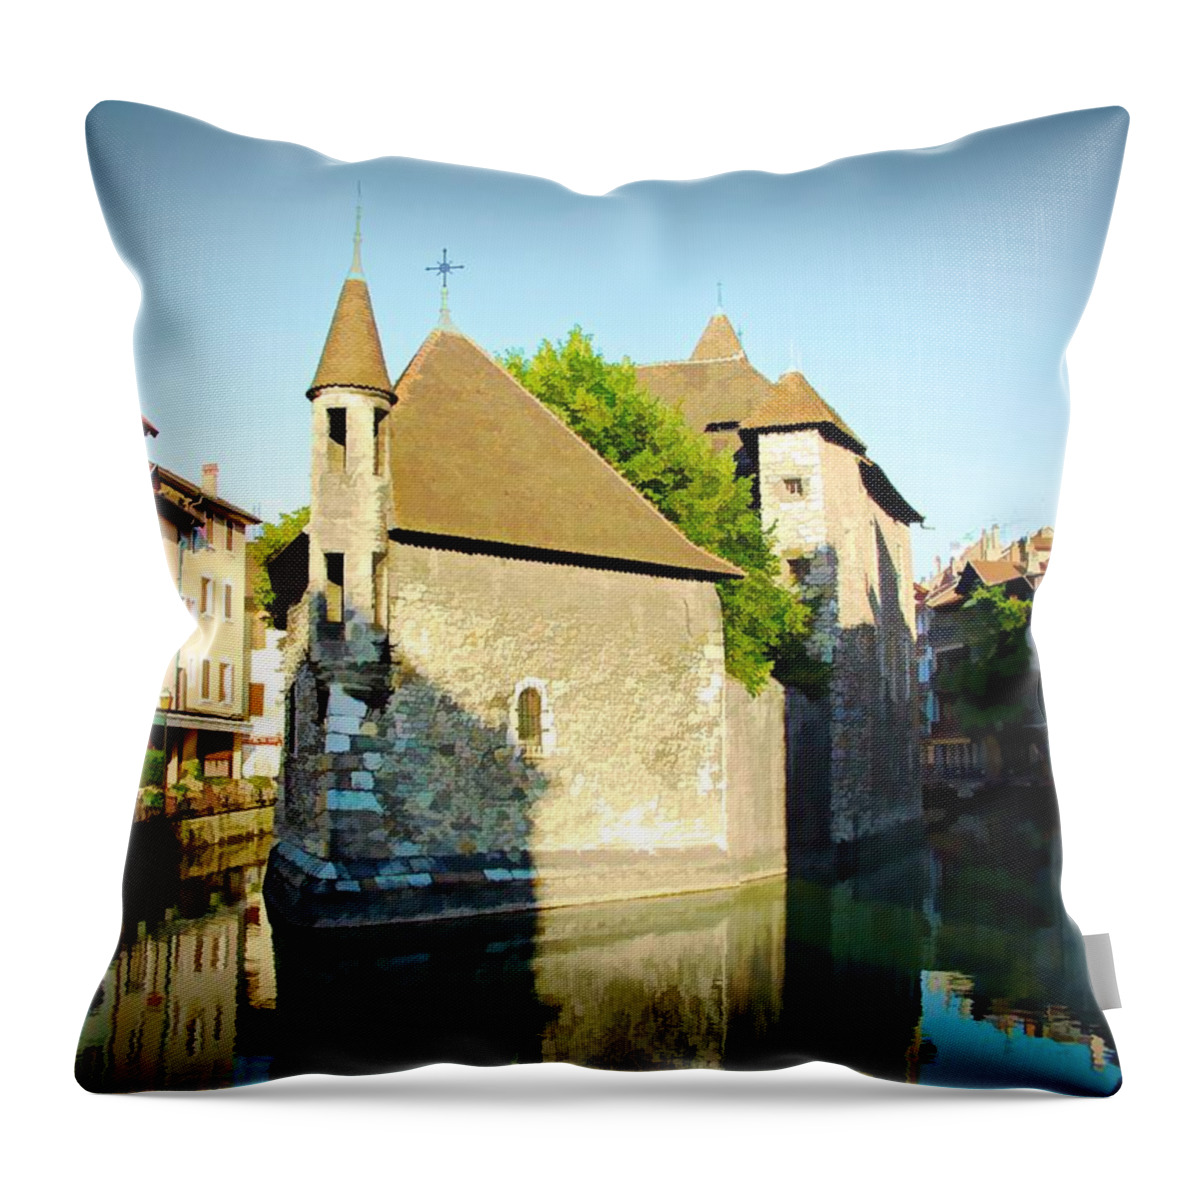 Europe Throw Pillow featuring the digital art Annecy Canal - Annecy, France by Joseph Hendrix